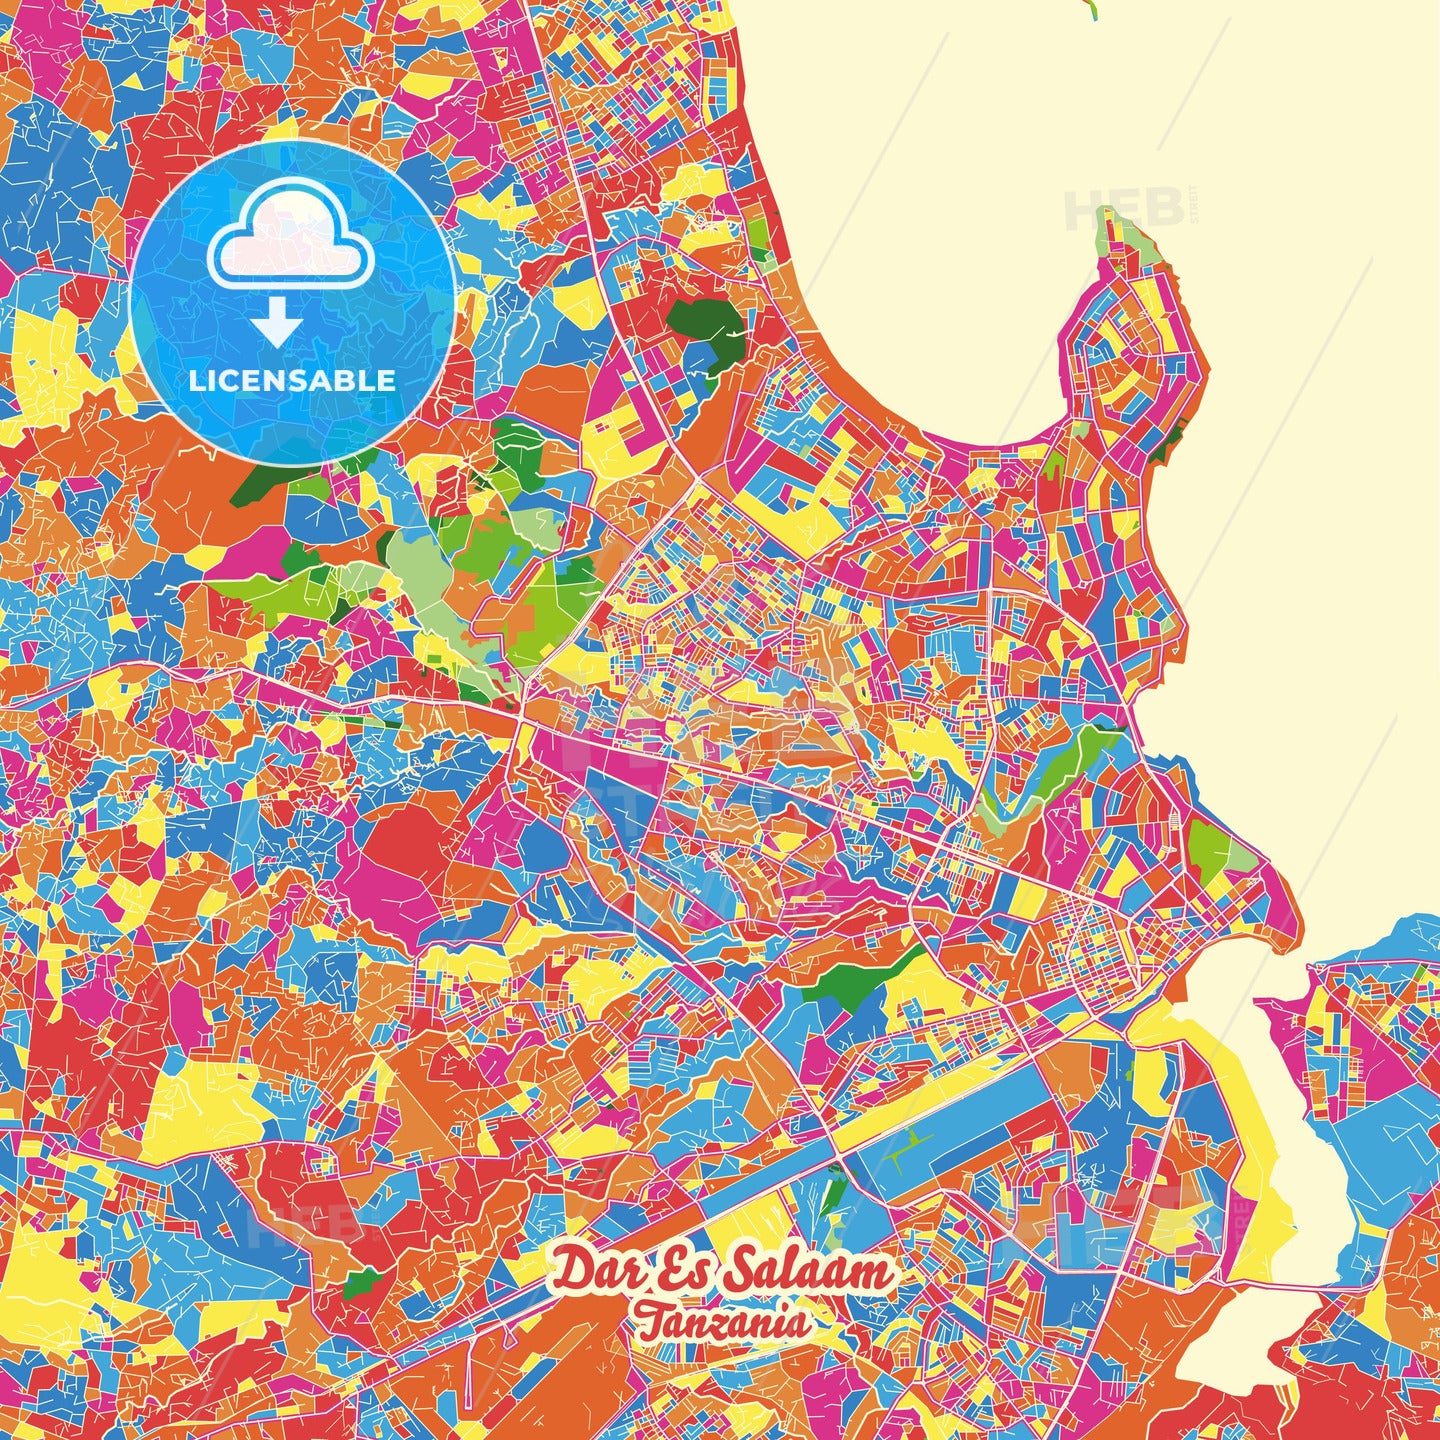 Dar es Salaam, Tanzania Crazy Colorful Street Map Poster Template - HEBSTREITS Sketches